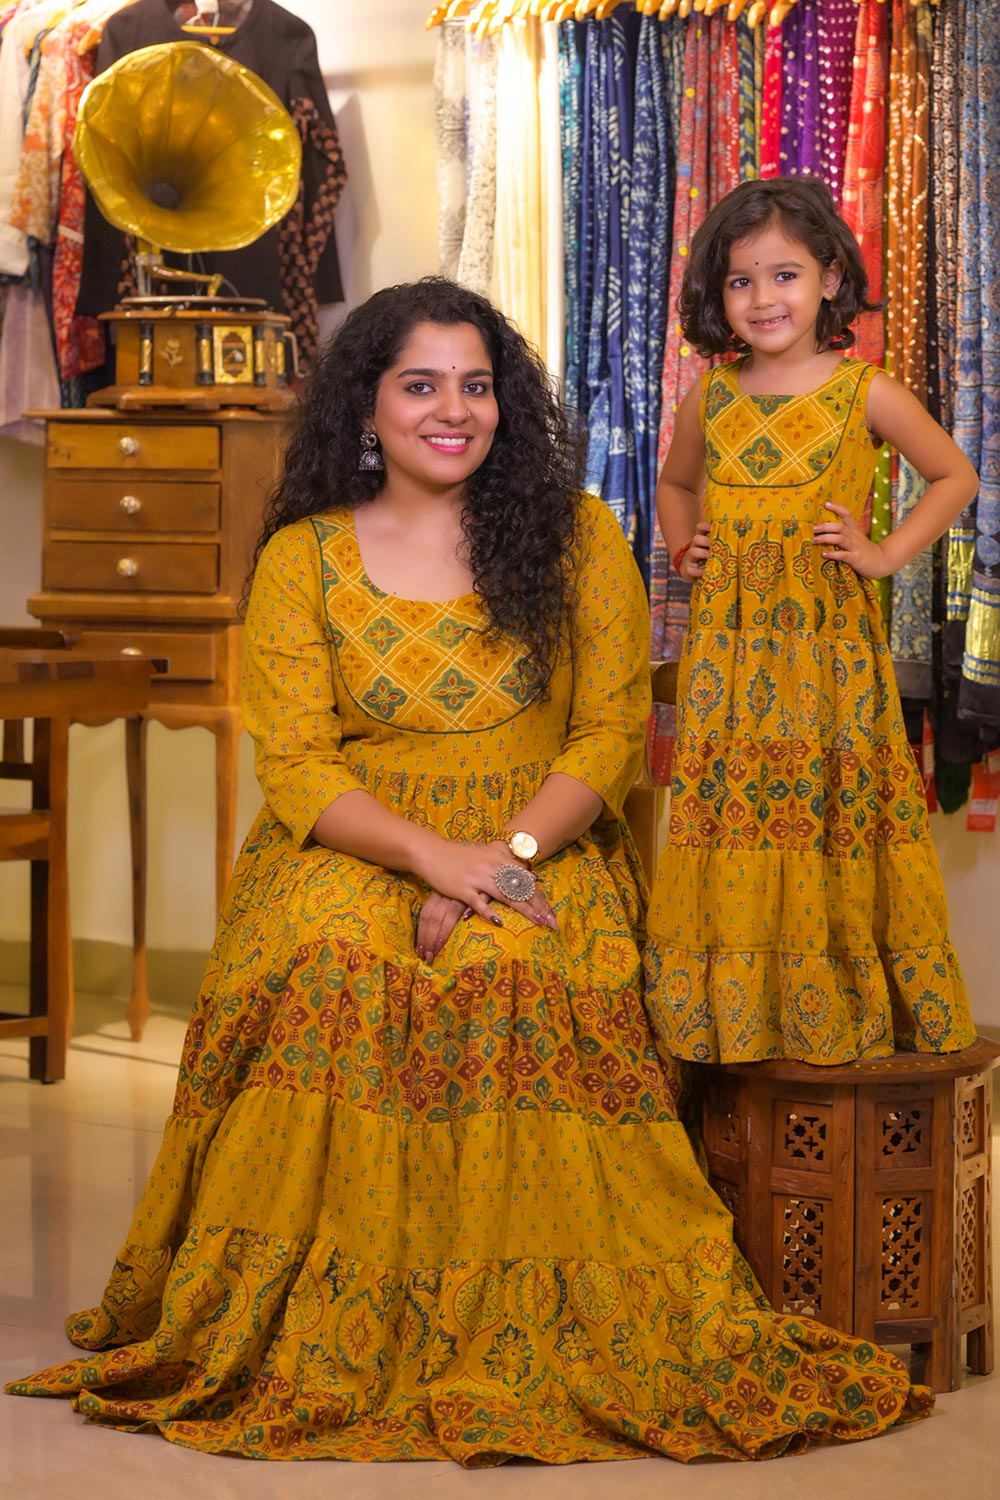 Yellow Indian Dresses - Shop Yellow Indian Clothing Online in Australia